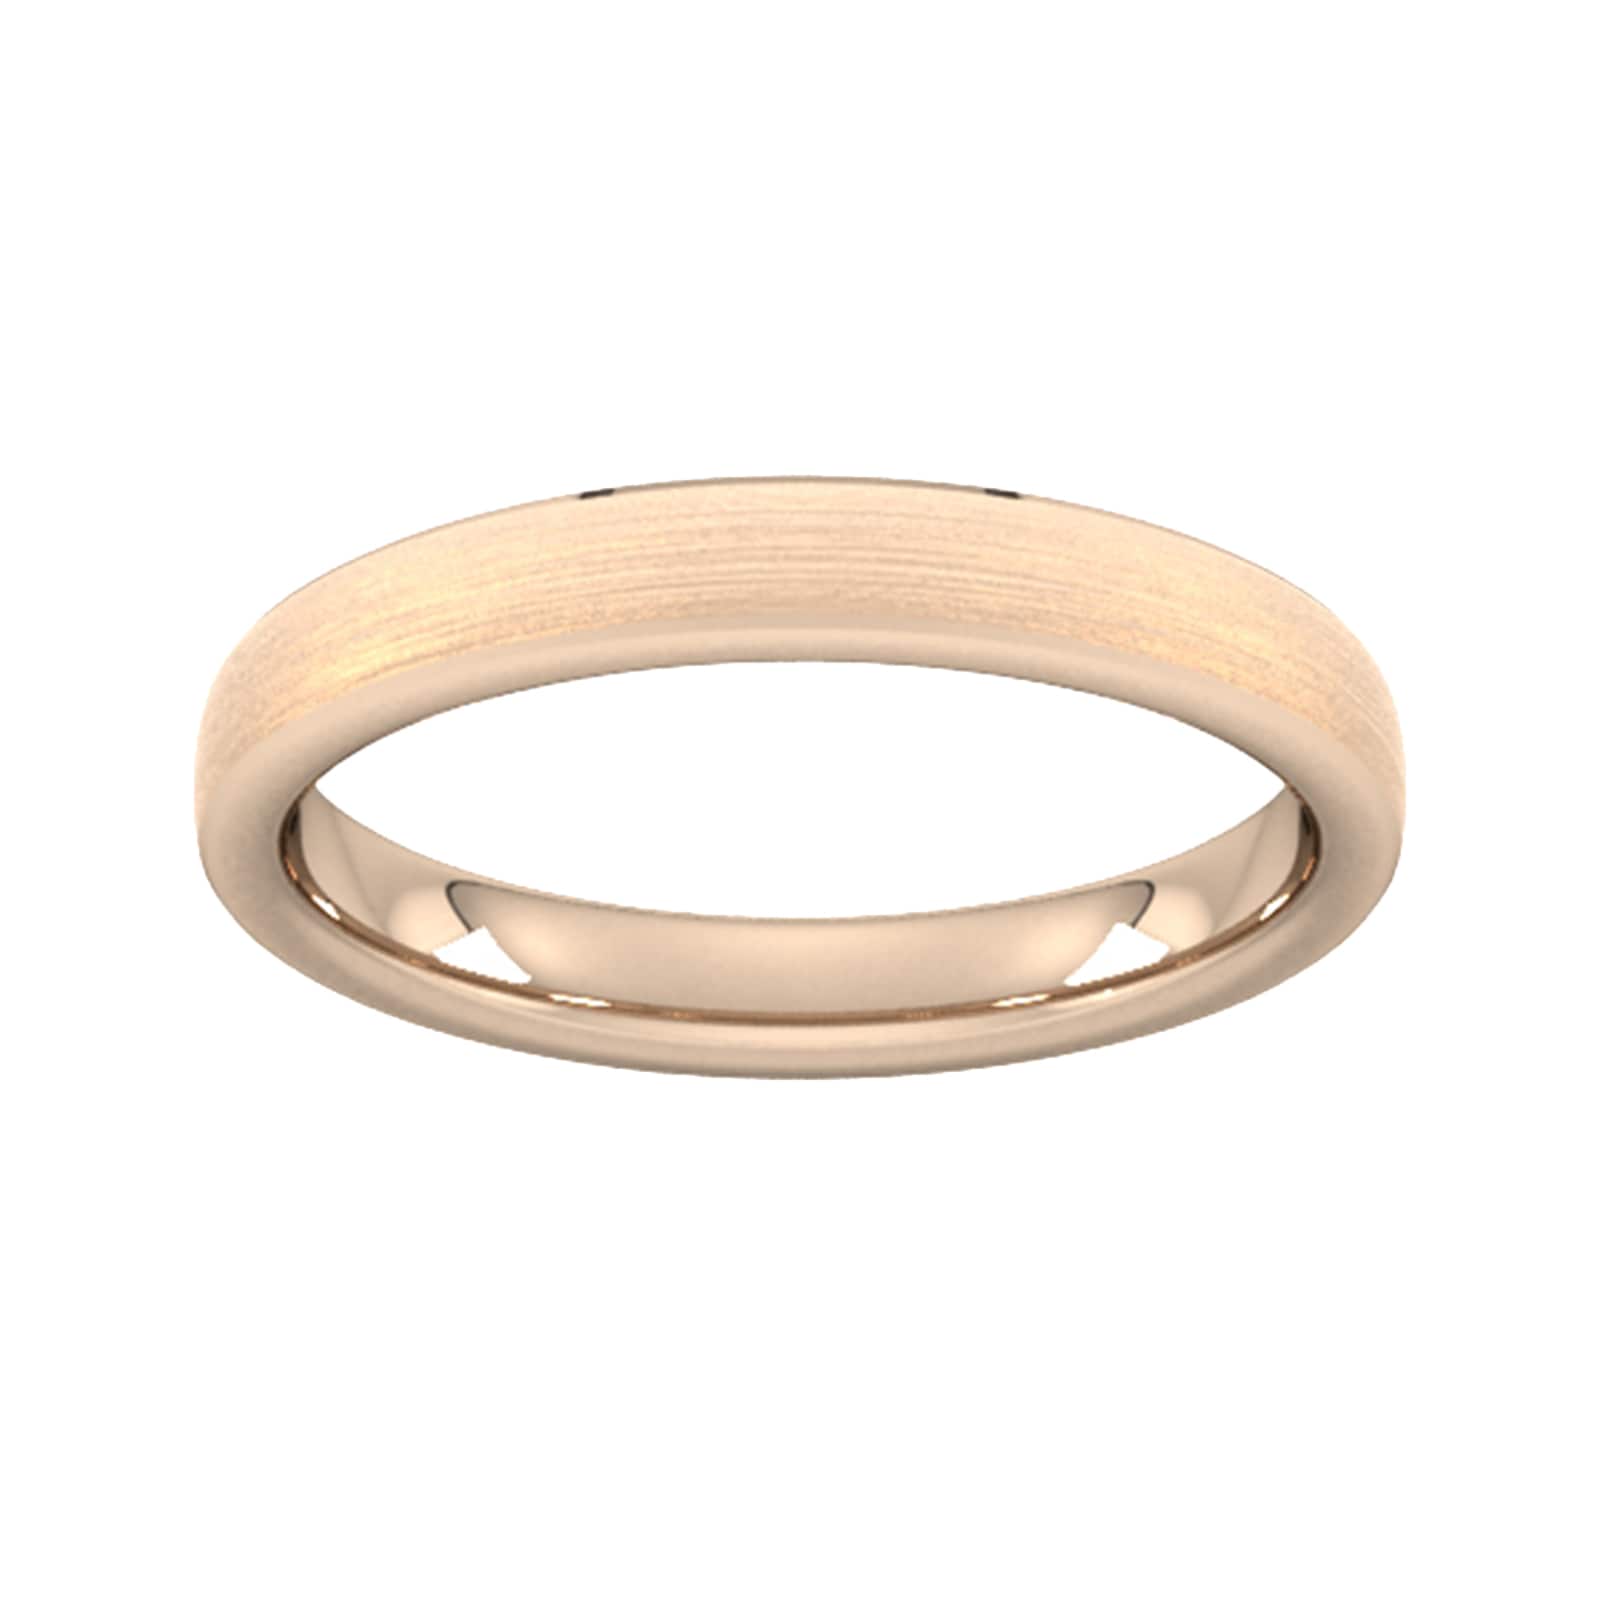 3mm Slight Court Standard Polished Chamfered Edges With Matt Centre Wedding Ring In 9 Carat Rose Gold - Ring Size I